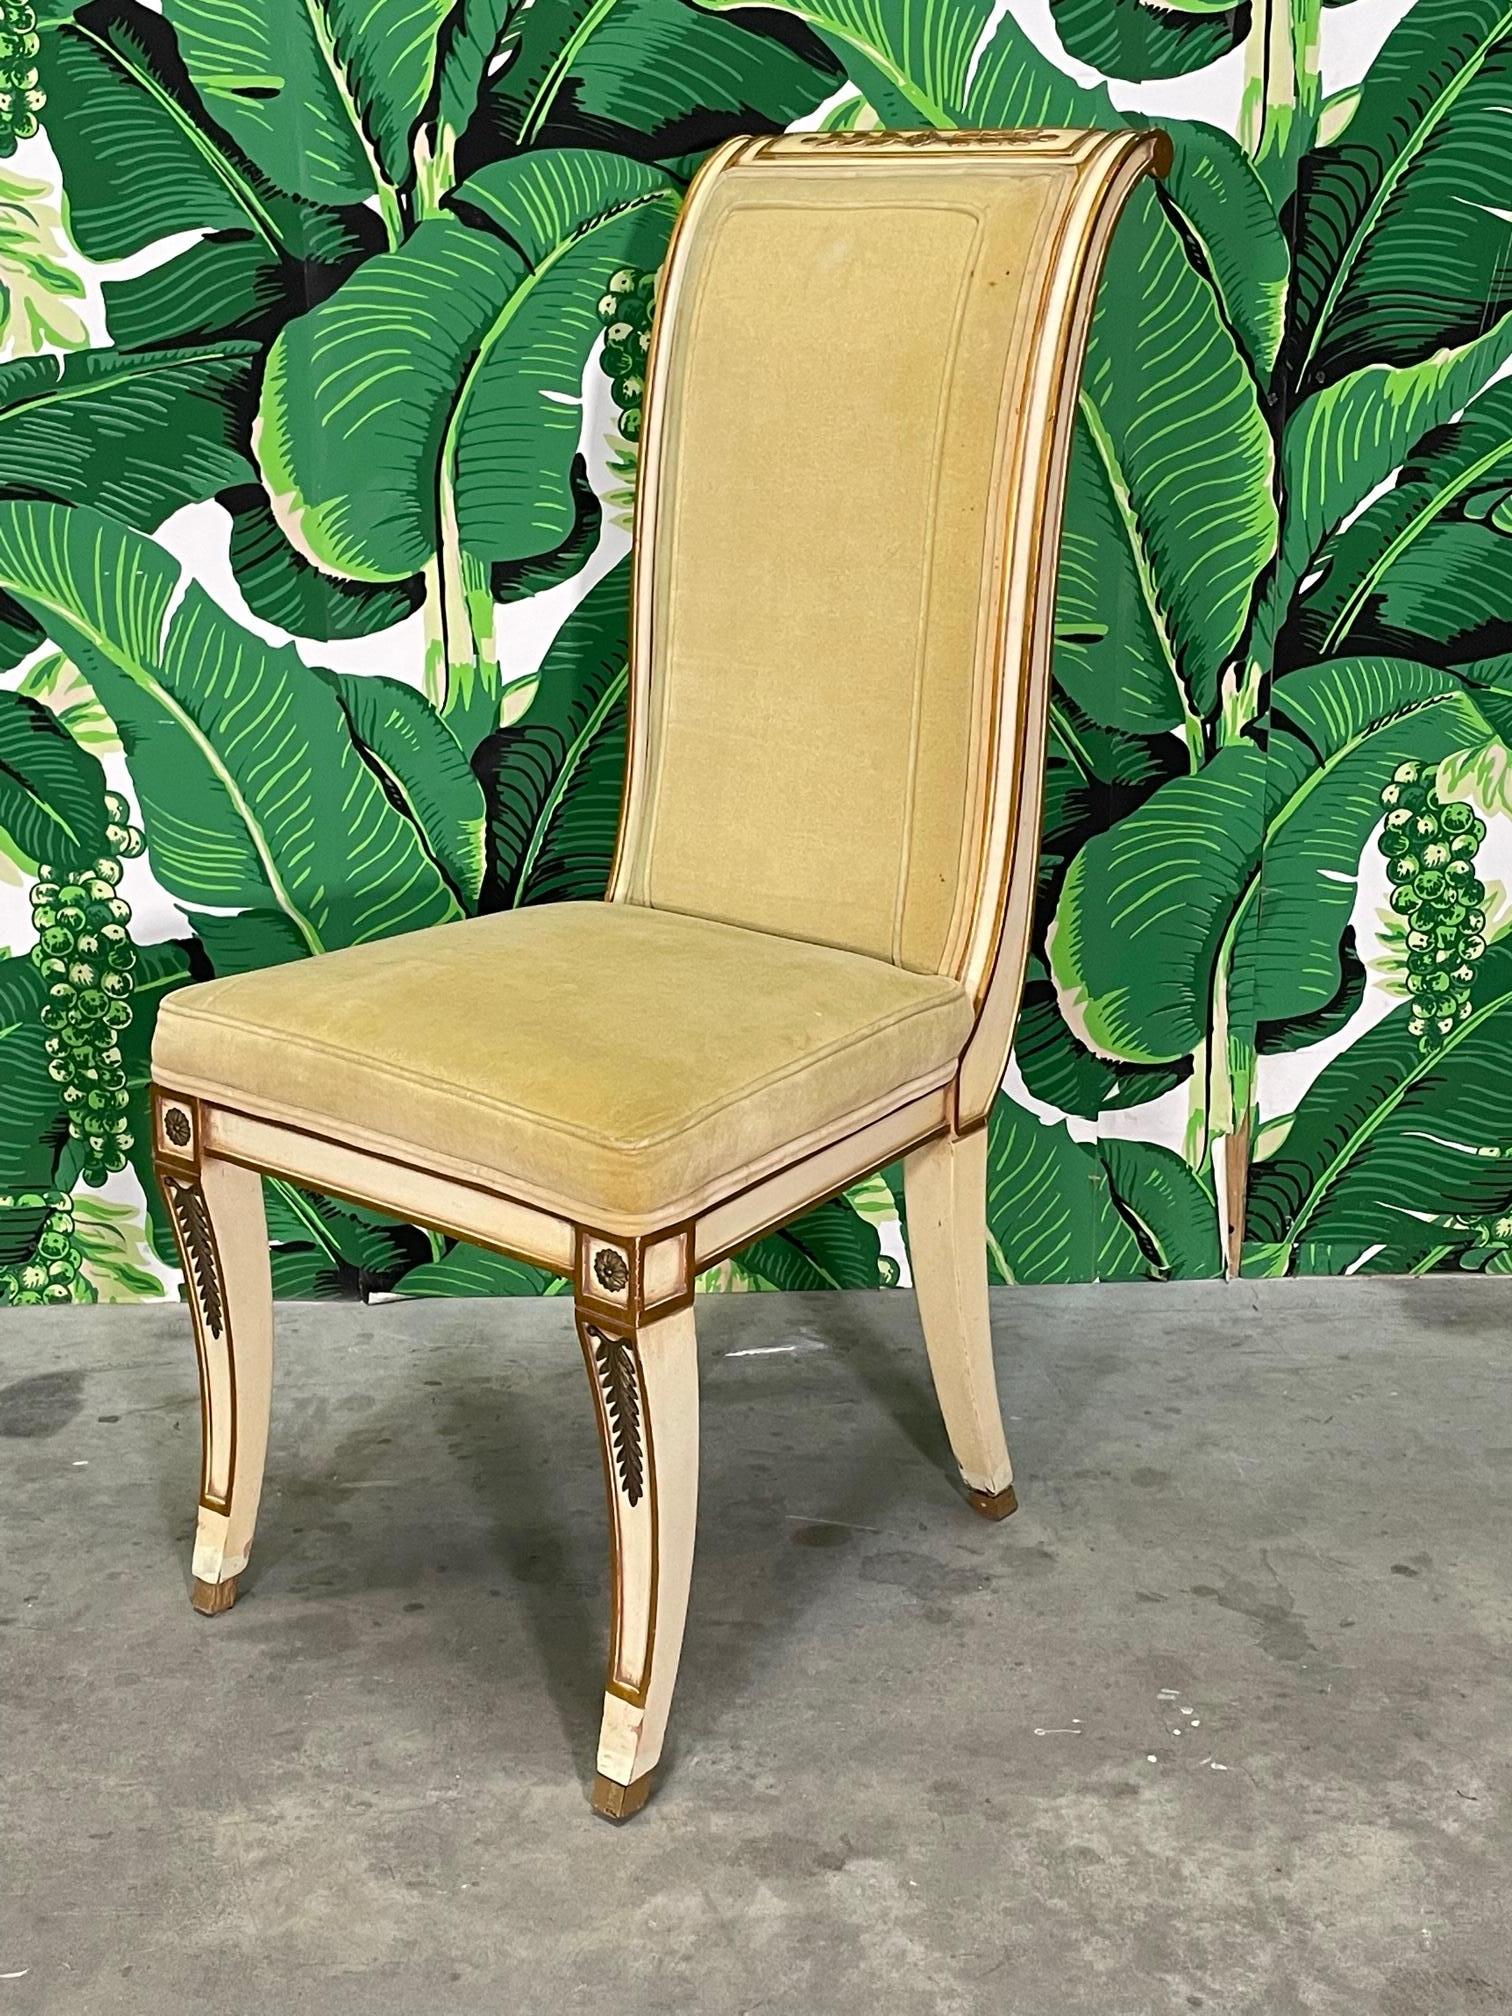 Set of six neoclassical style dining chairs by Karges Furniture feature gilded detailing, saber legs, and soft velvet upholstery. Upholstered backs as well. Very comfortable. Good vintage condition with imperfections consistent with age. May exhibit